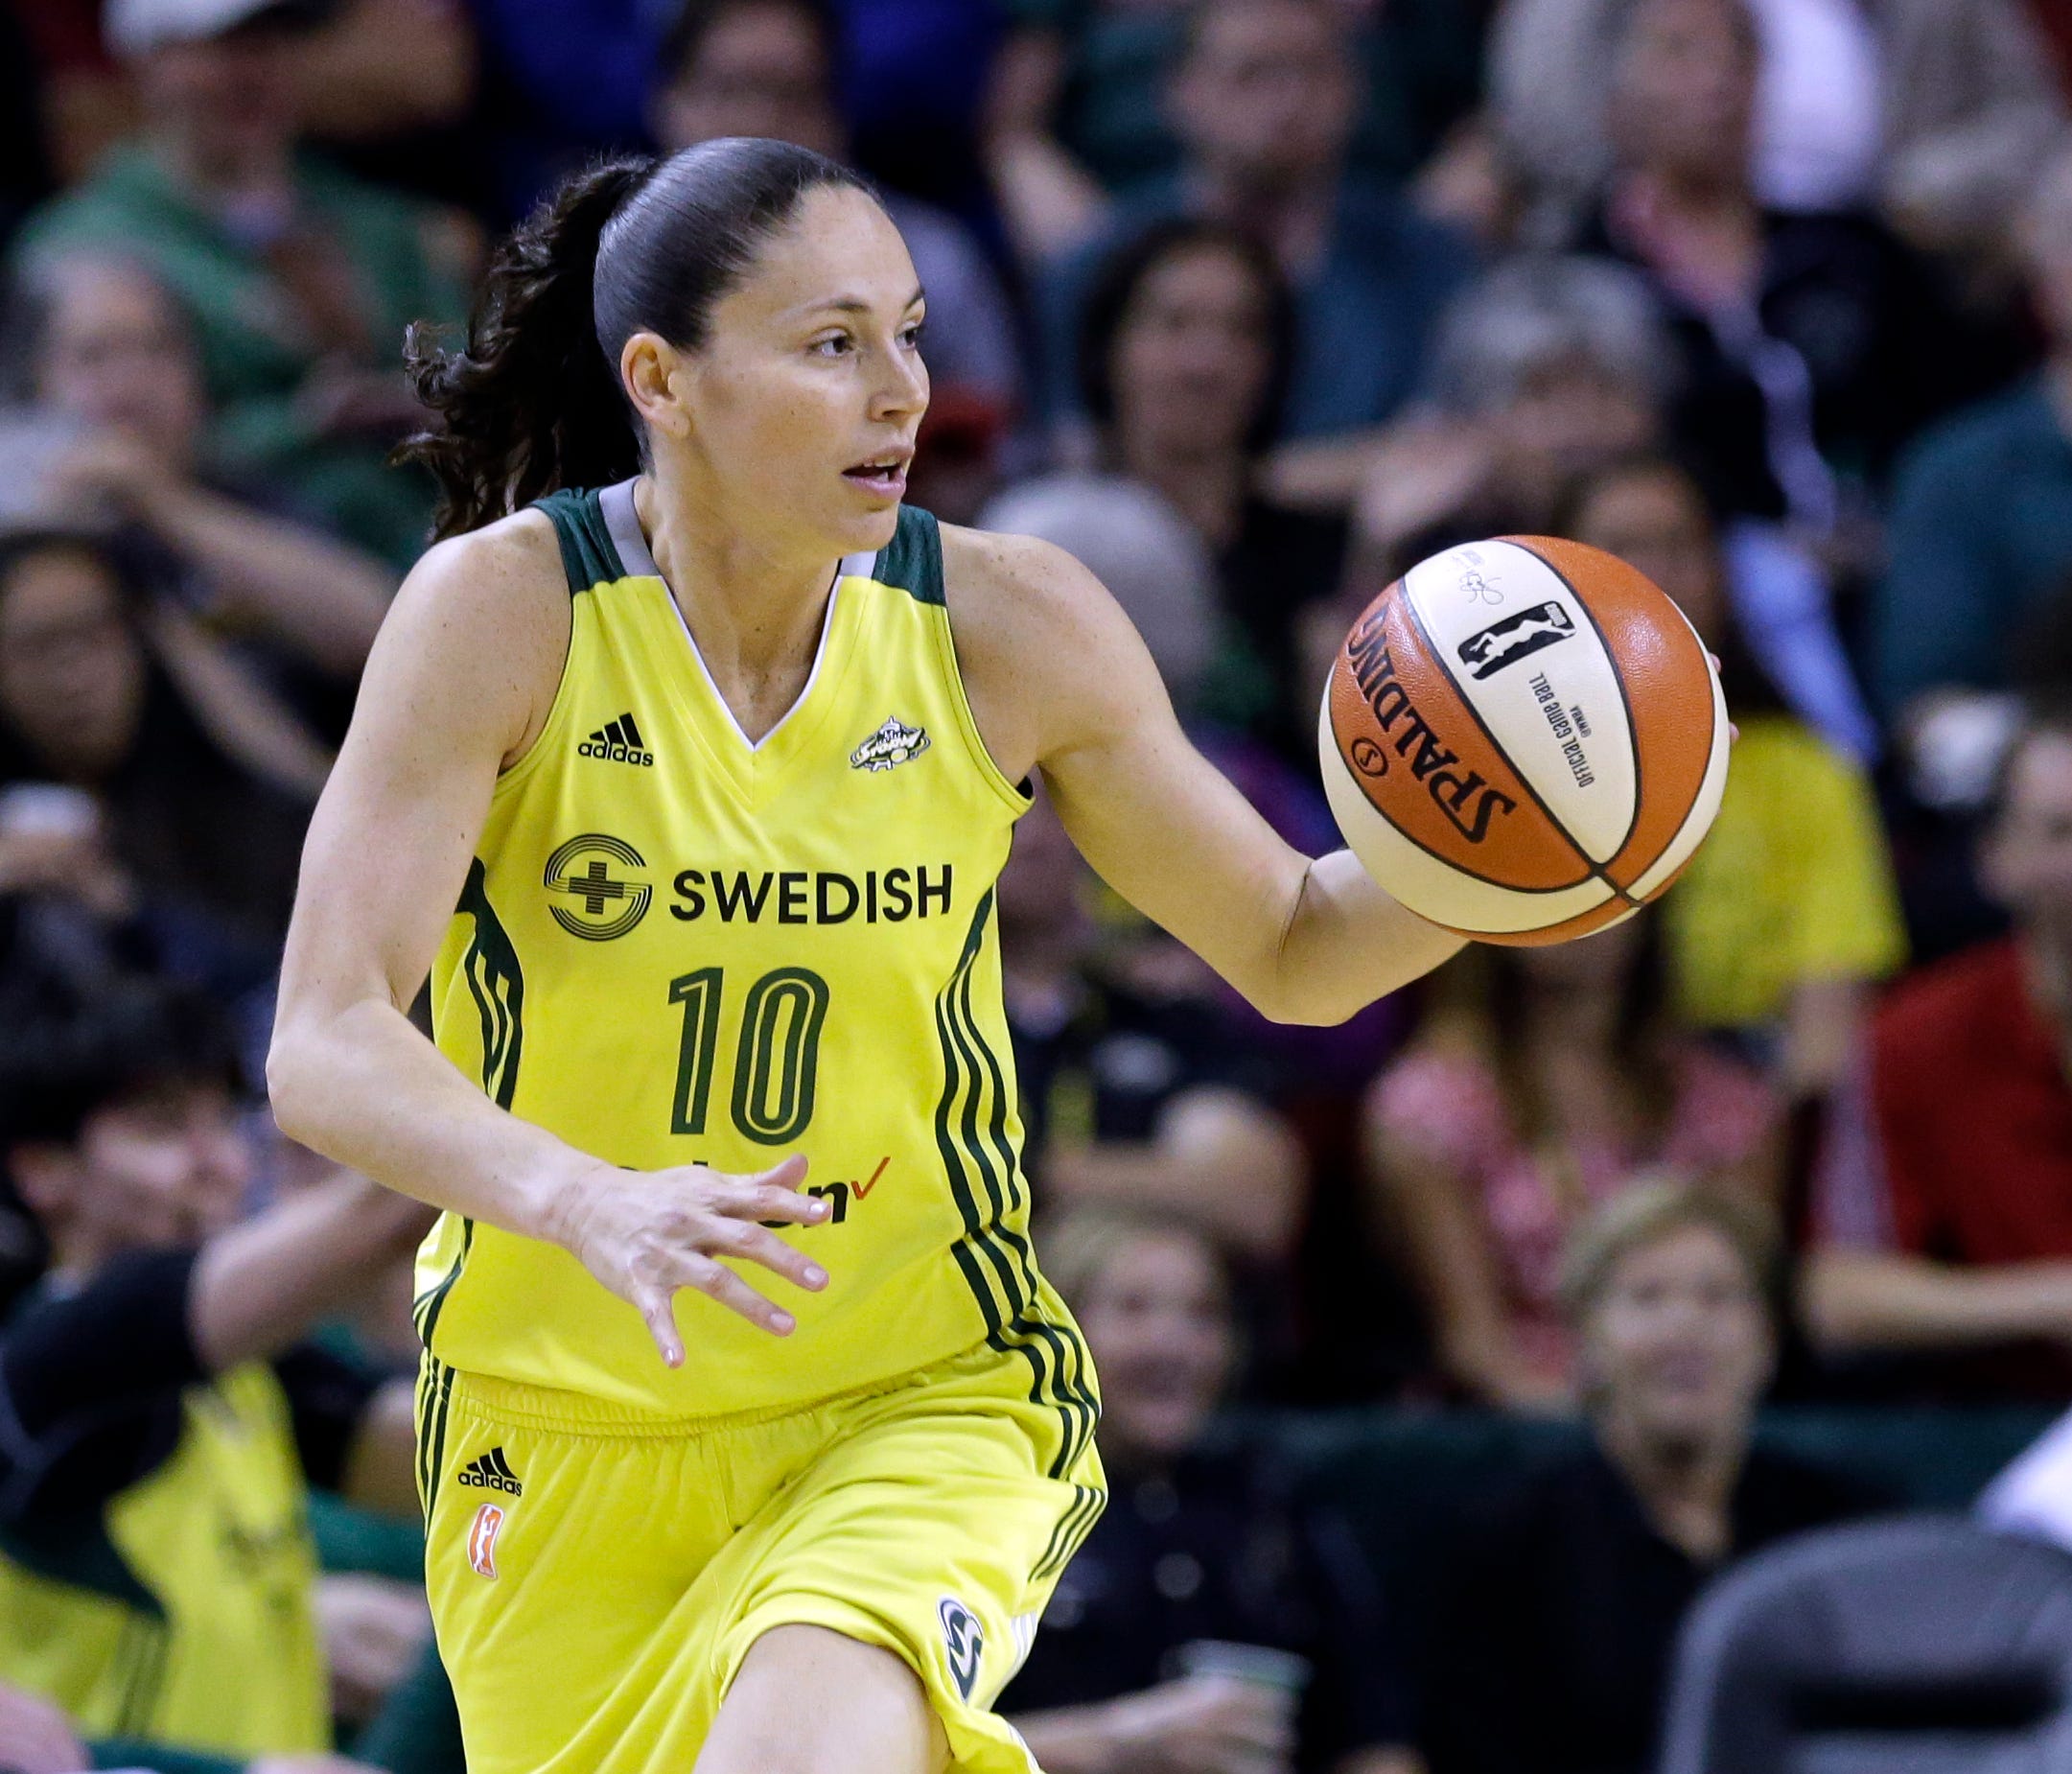 Seattle Storm's Sue Bird in action against the San Antonio Stars in a WNBA basketball game Sunday, June 18, 2017, in Seattle. (AP Photo/Elaine Thompson) ORG XMIT: OTK